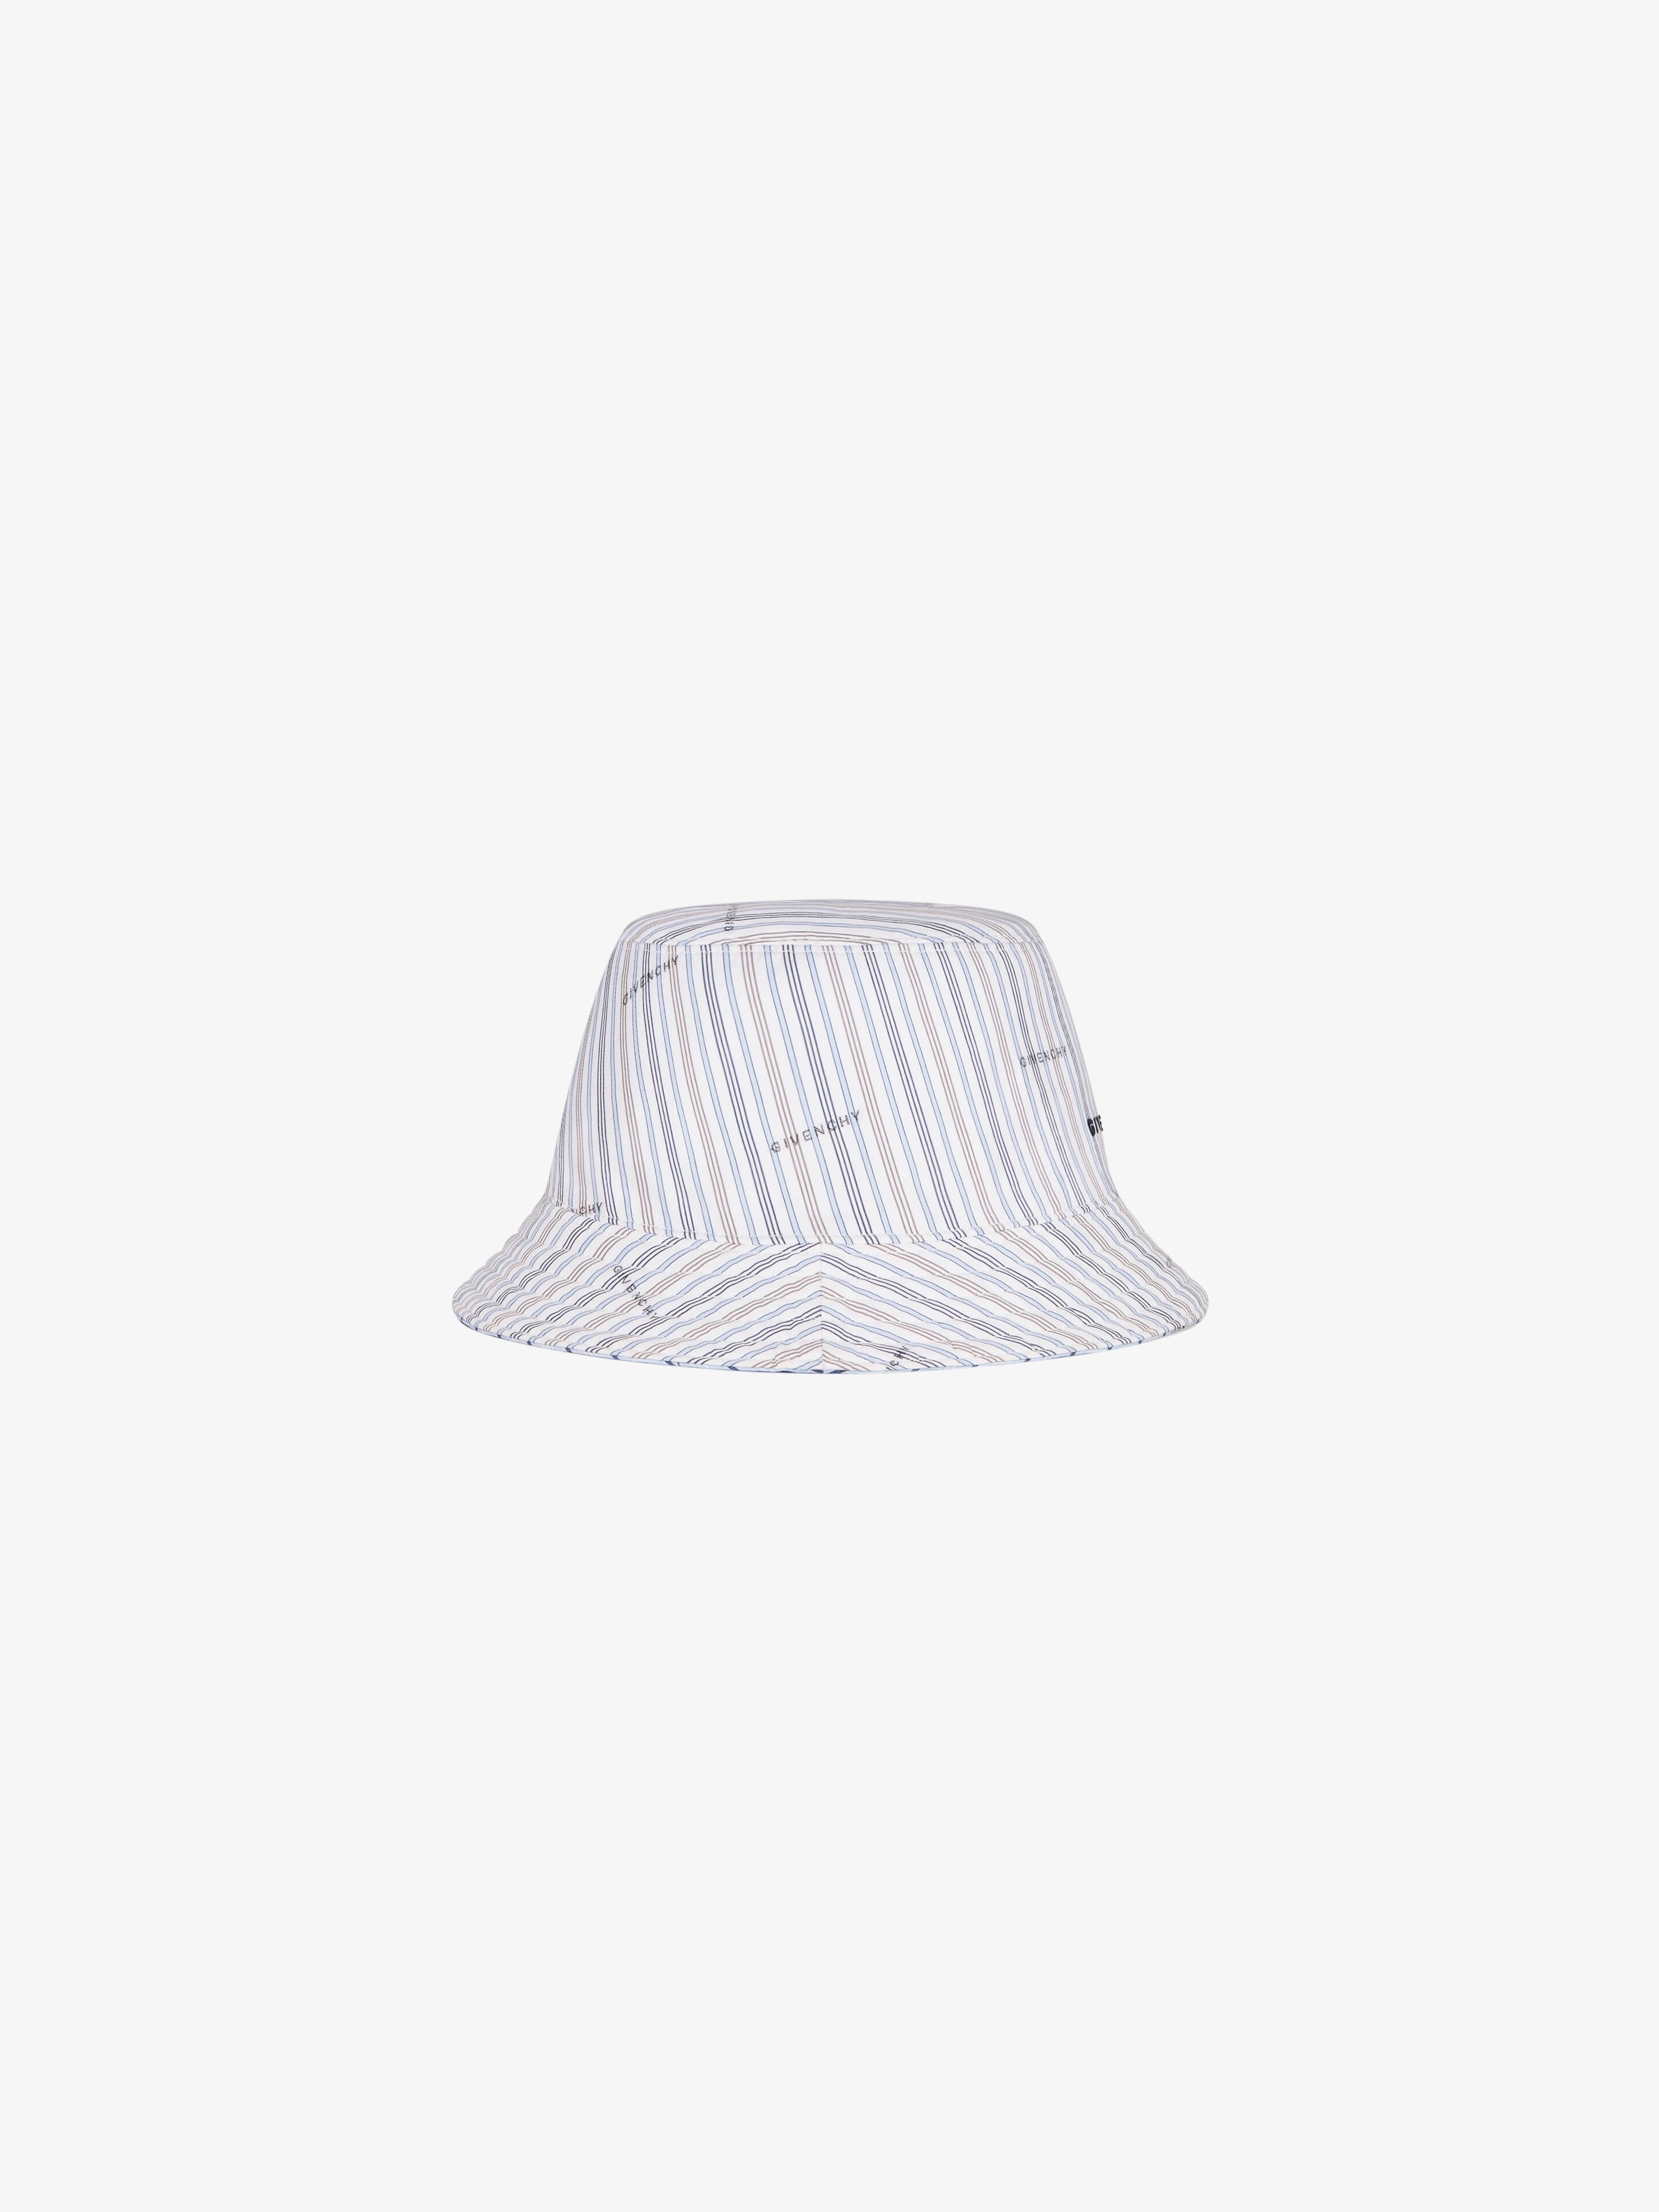 REVERSIBLE GIVENCHY BUCKET HAT - 4